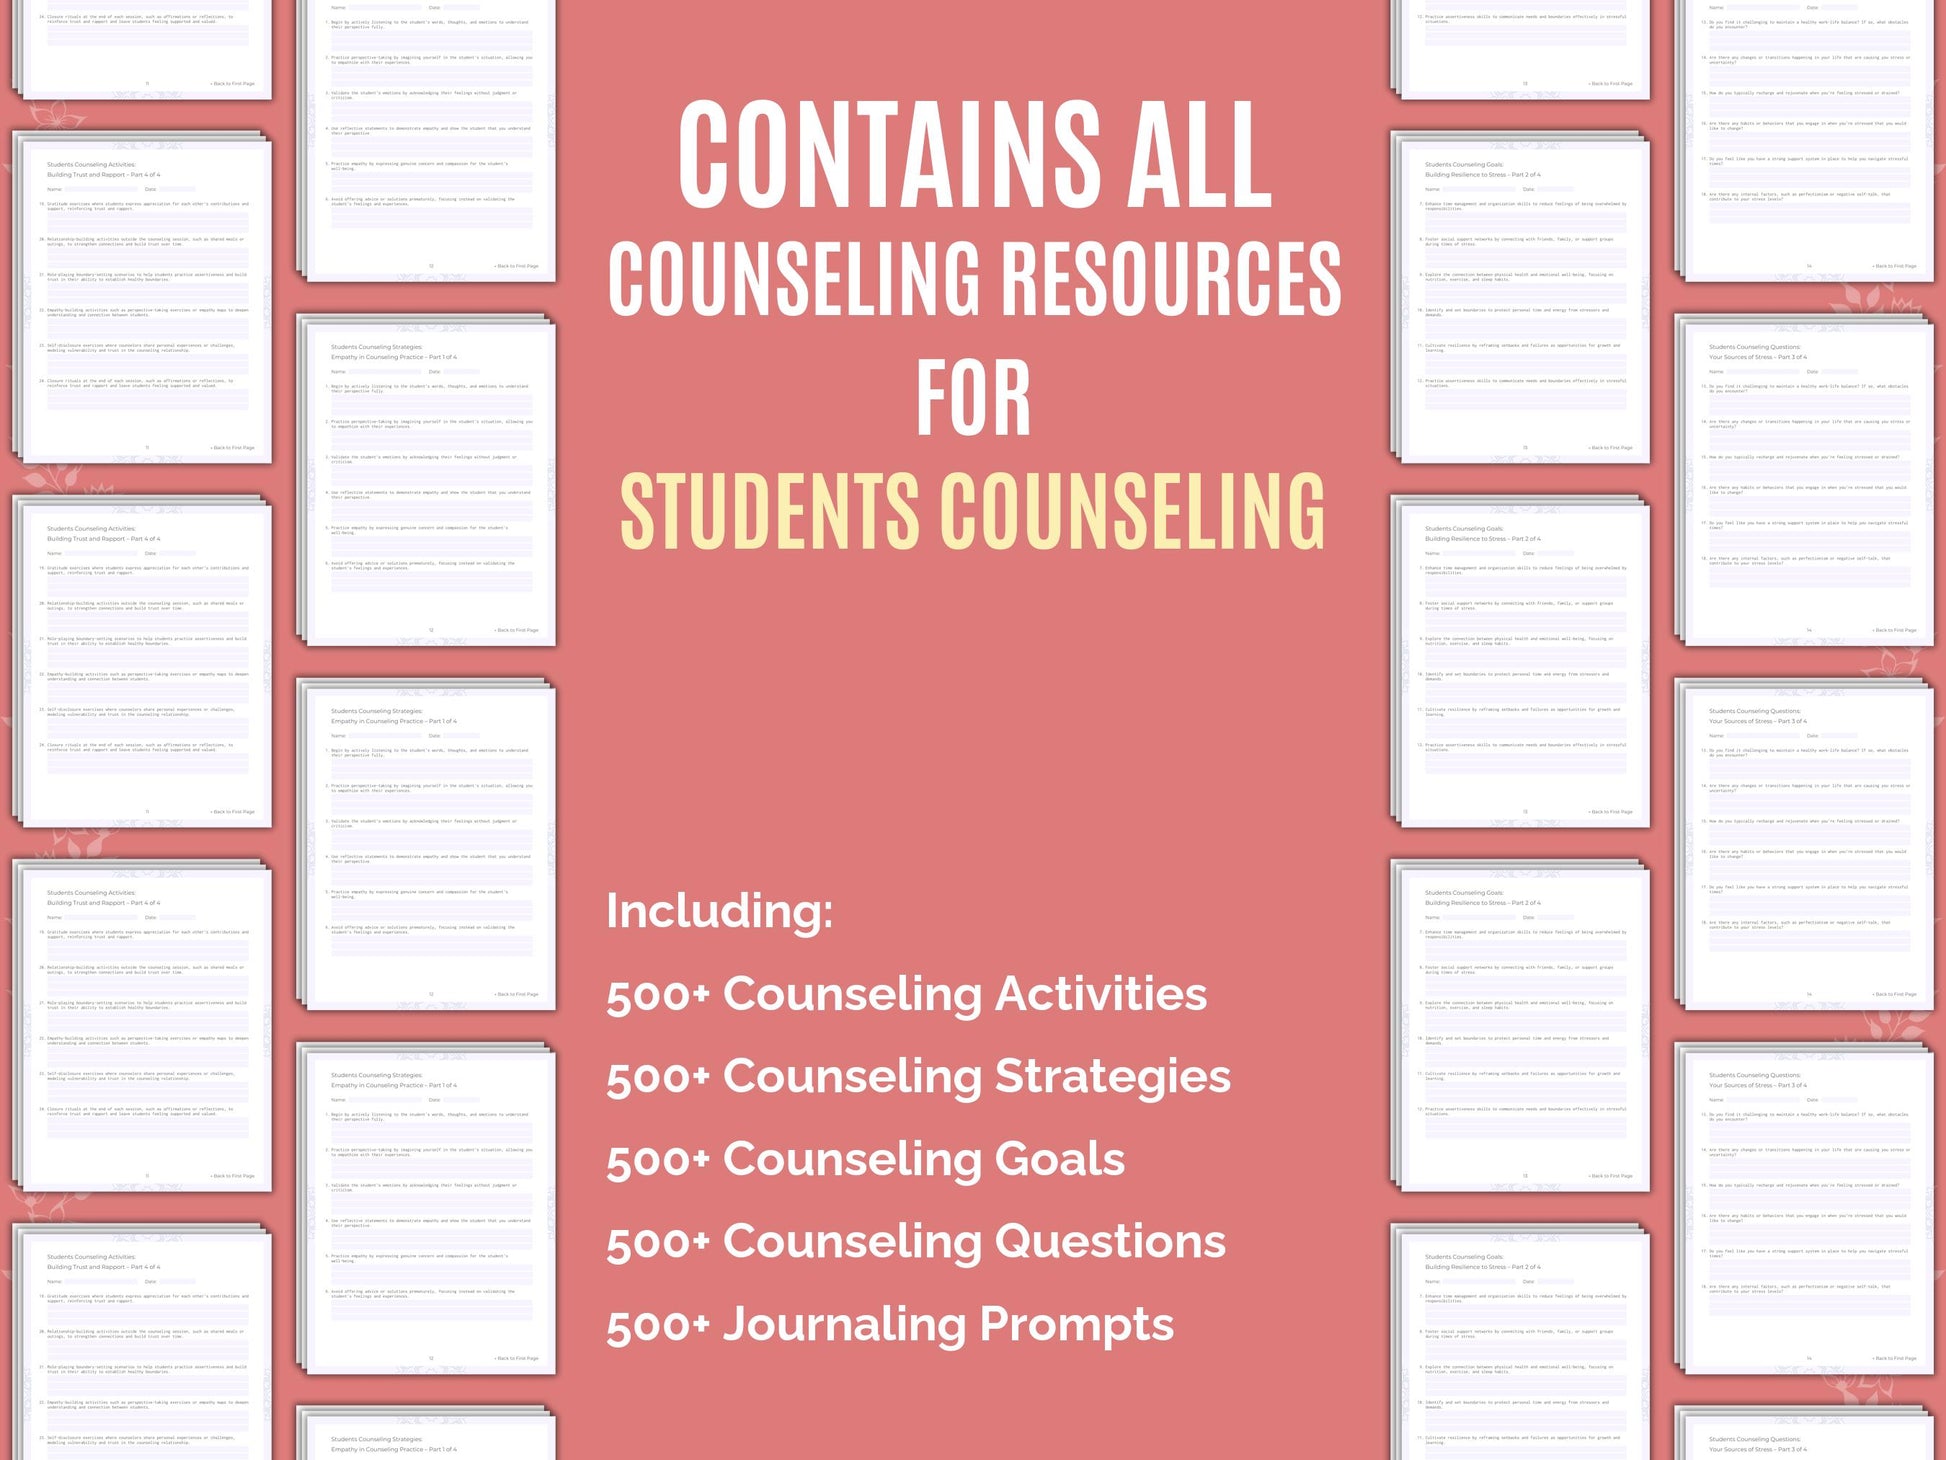 Students Counseling, Students Workbook, Students Template, Mental Health, Students Therapy, Students Content, Students Tool, Students Idea, Counselor, Students Resource, Students Worksheet, Therapist, Students Bundle